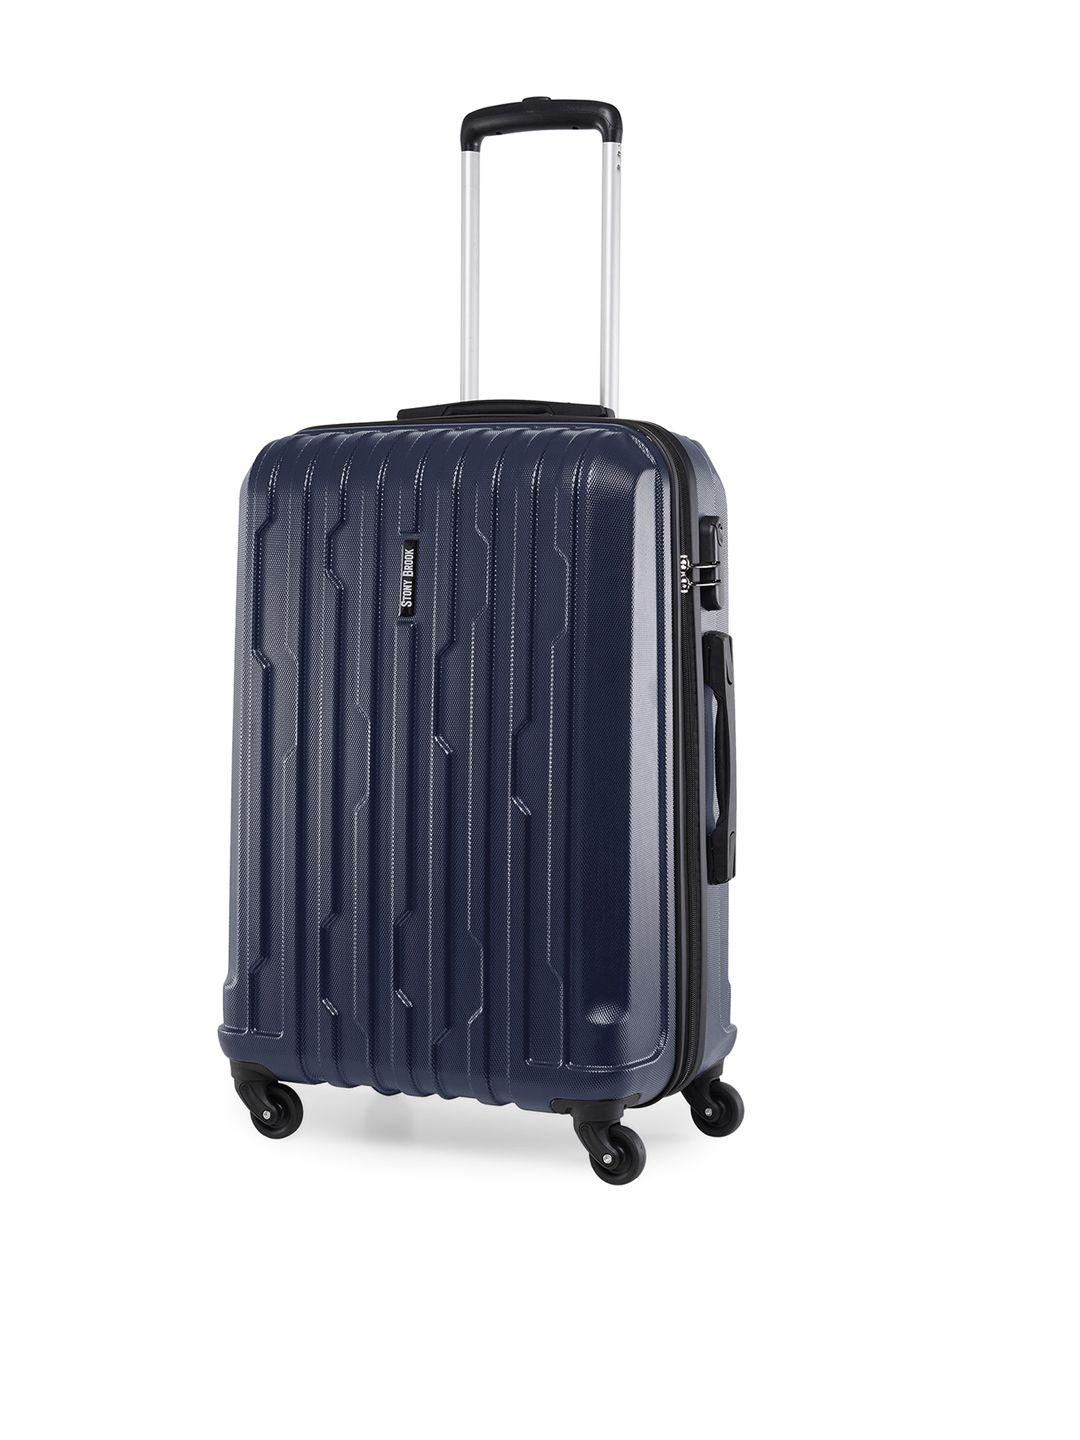 stony brook by nasher miles textured hard-sided medium trolley suitcase